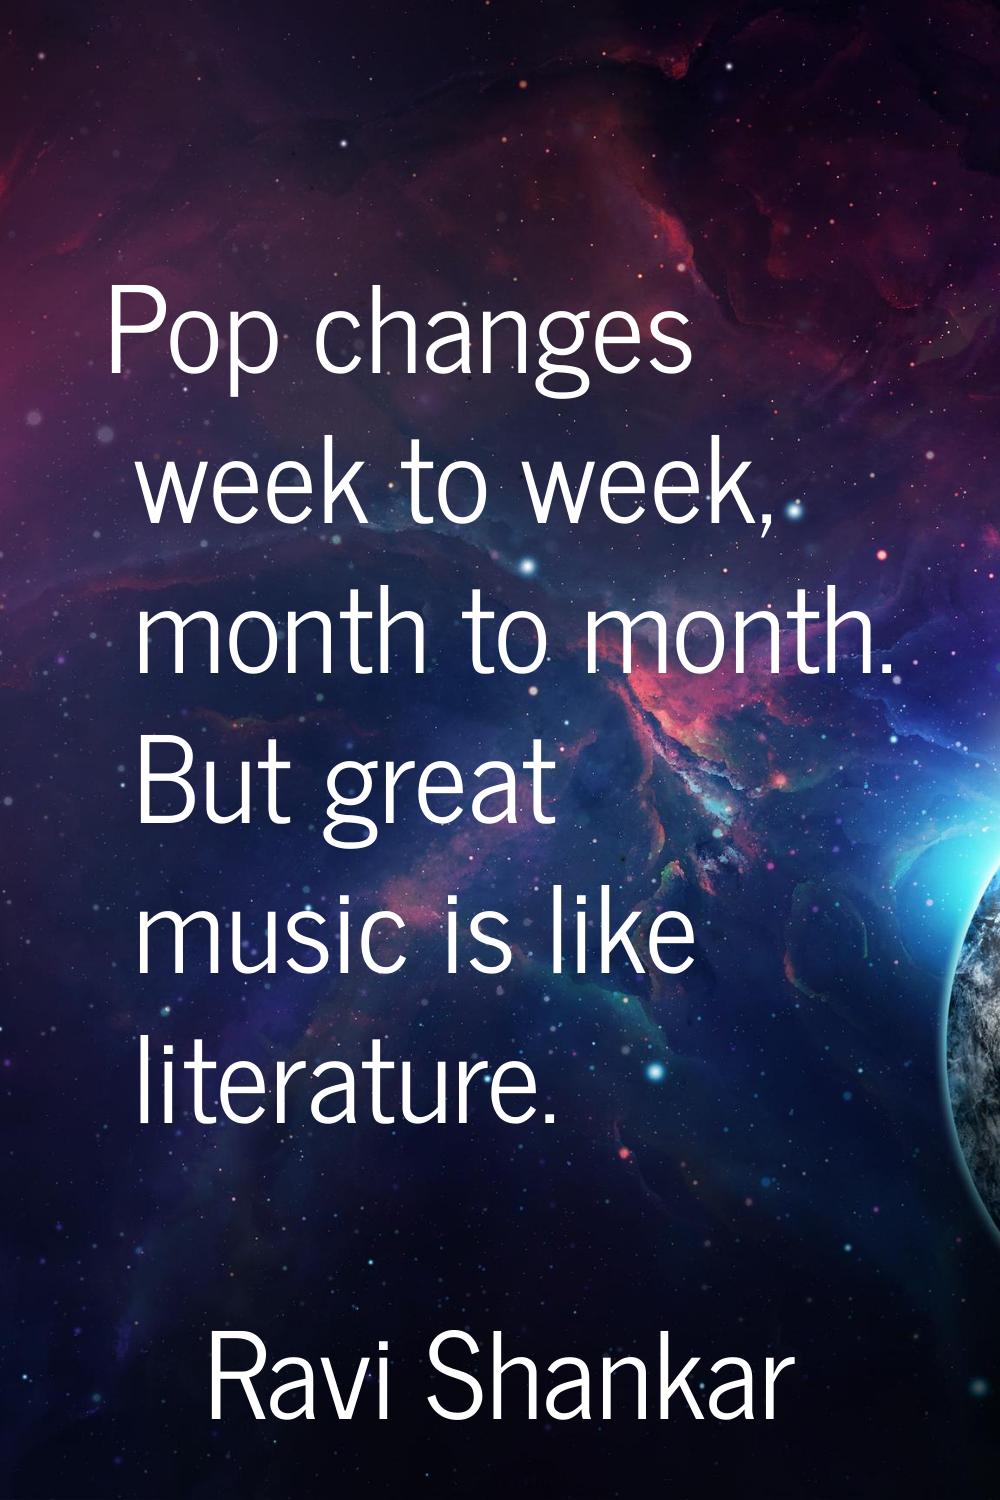 Pop changes week to week, month to month. But great music is like literature.